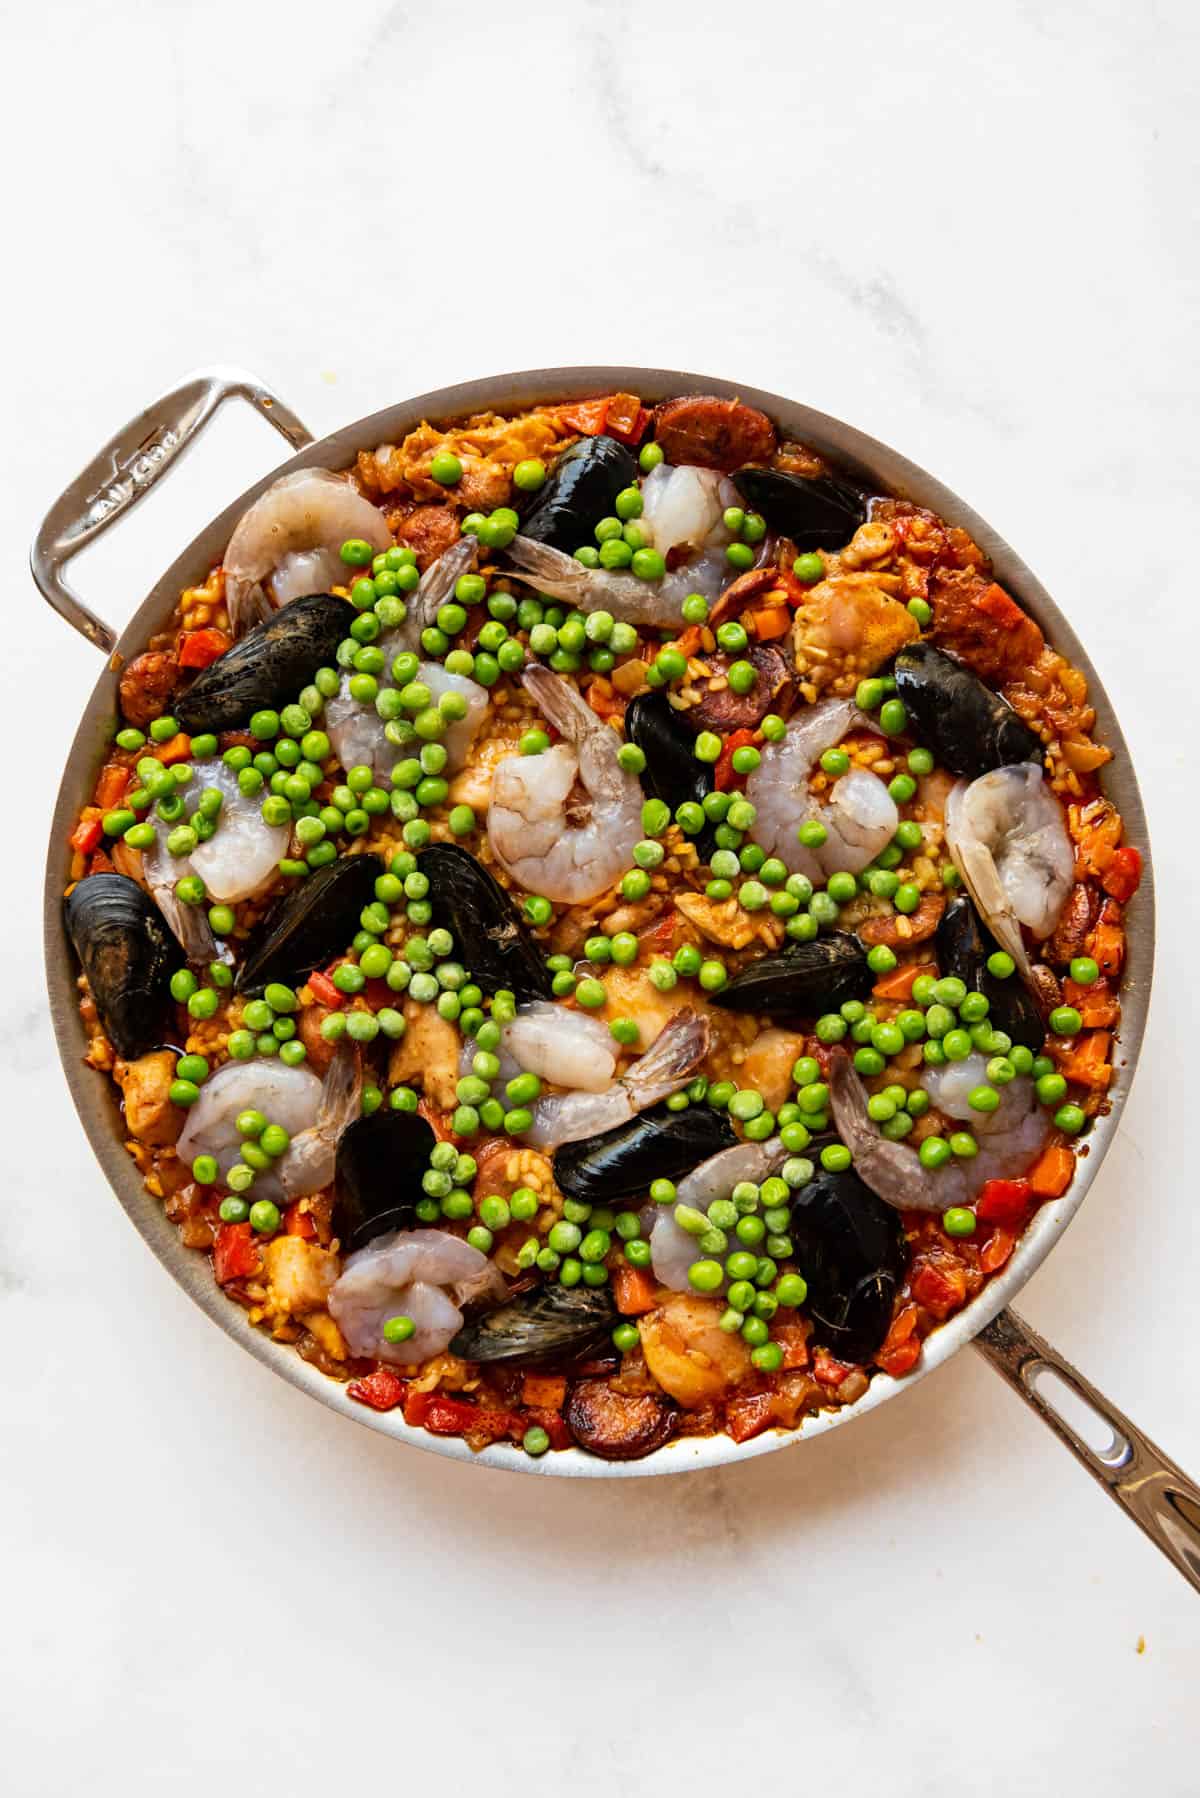 Adding raw shrimp and mussels and peas to paella.